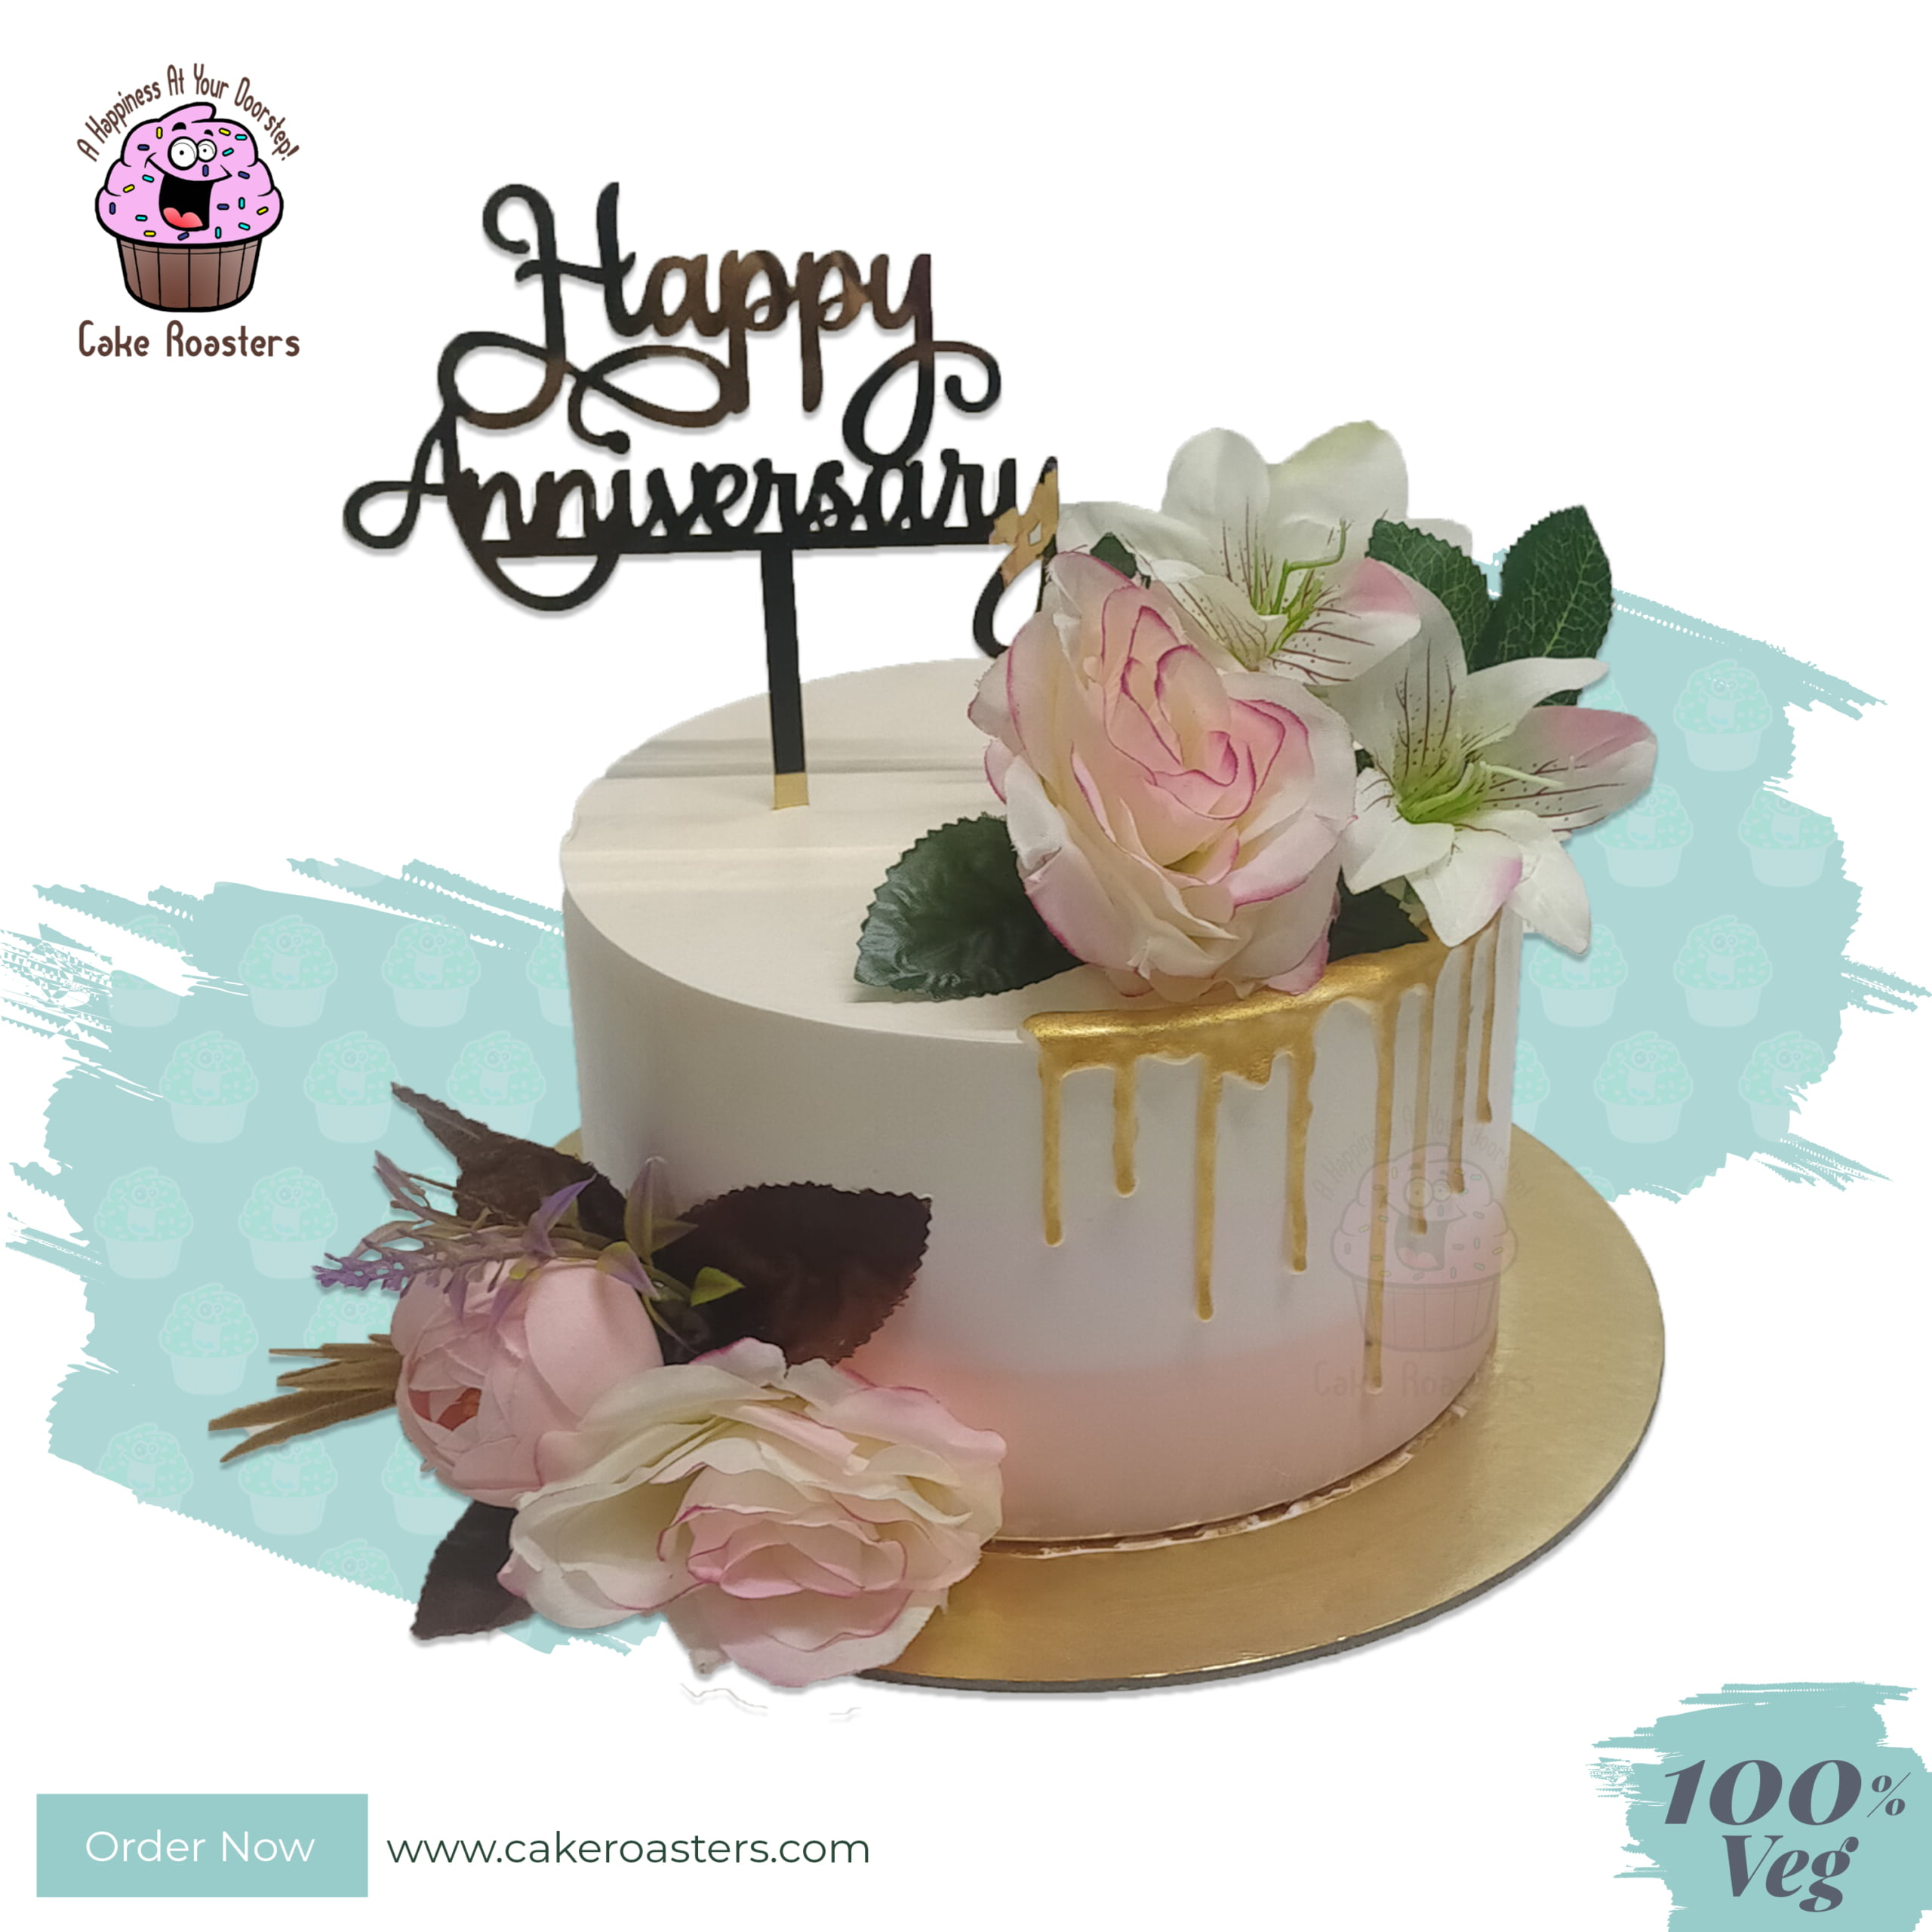 106 50th Wedding Anniversary Cake Images Stock Photos  Vectors   Shutterstock